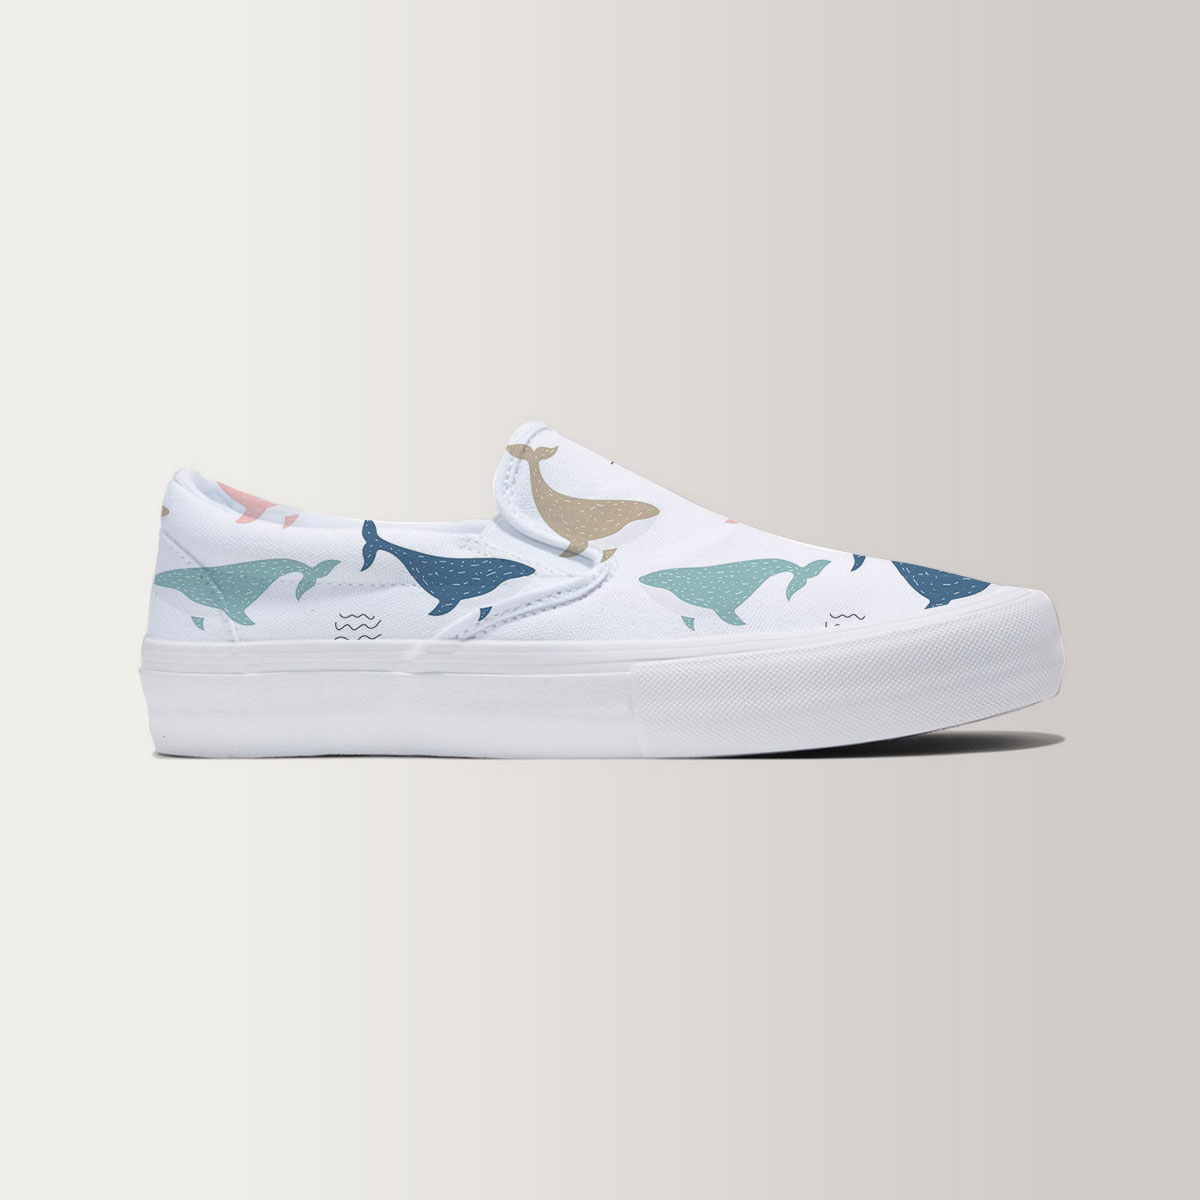 Colorful Blue Whale Slip On Sneakers